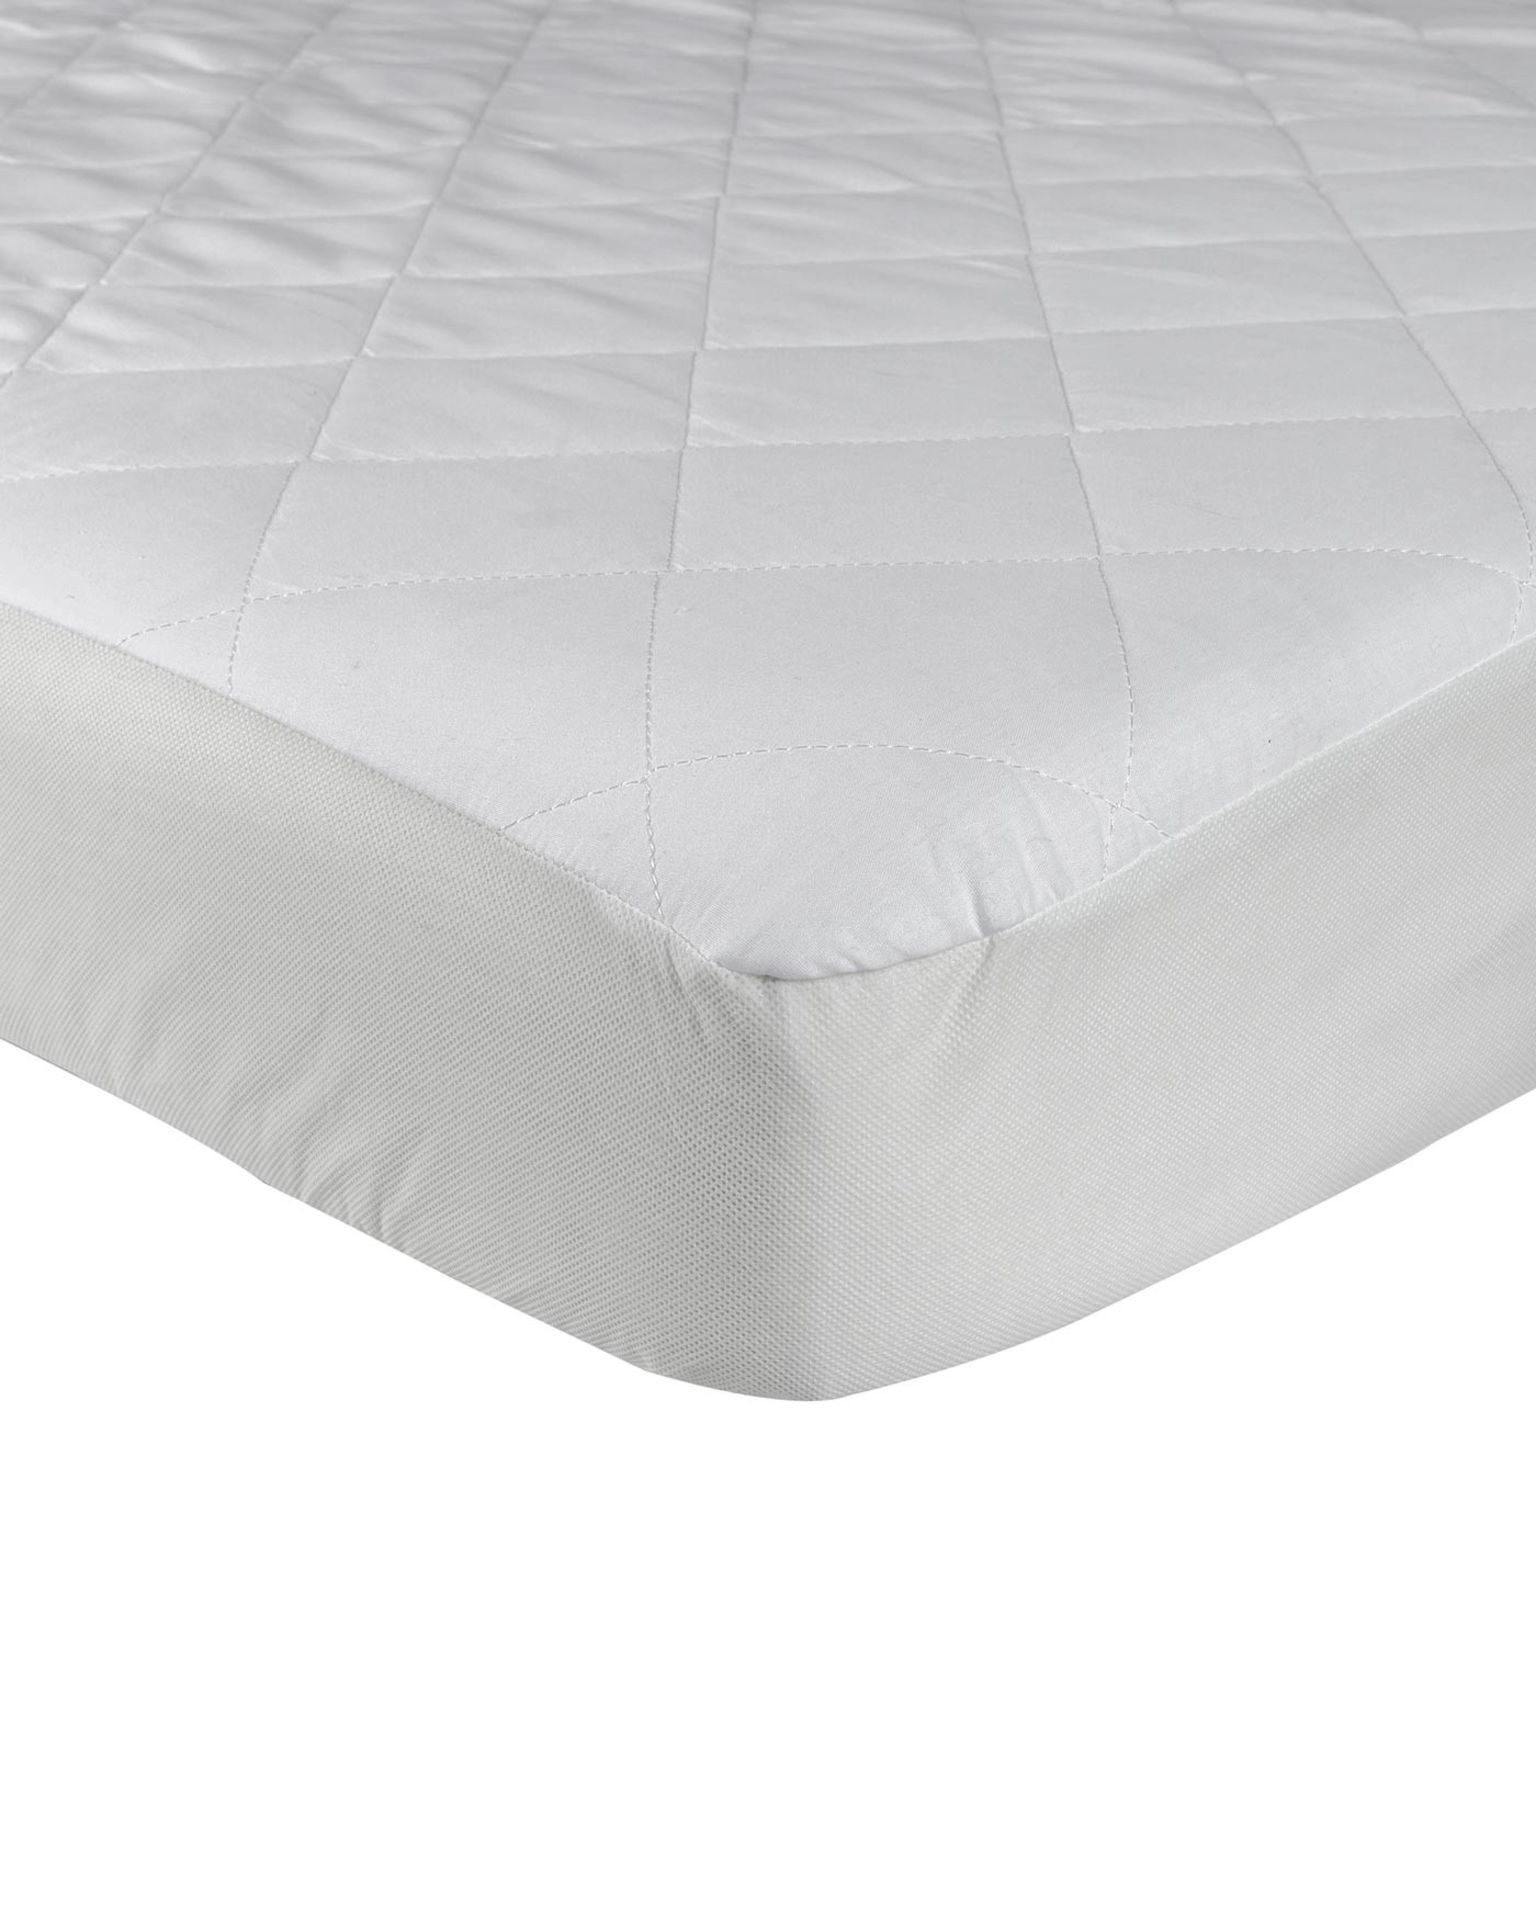 Brand New 152x198+33cm King Size Luxury Quilted Fitted Extra Deep Mattress Protector